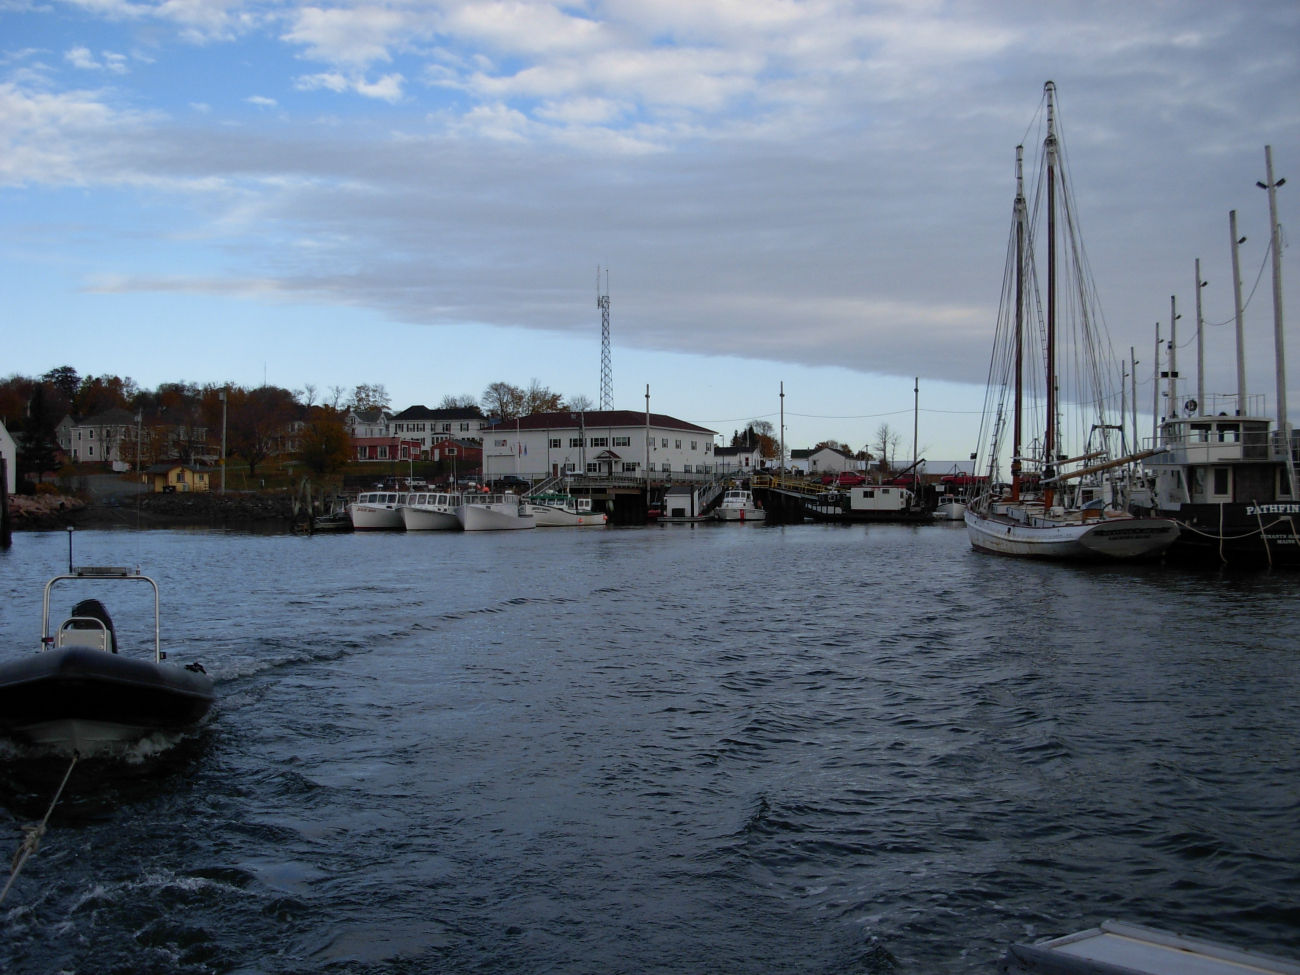 Leaving Eastport harbor and looking back at the Coast Guard pier and building